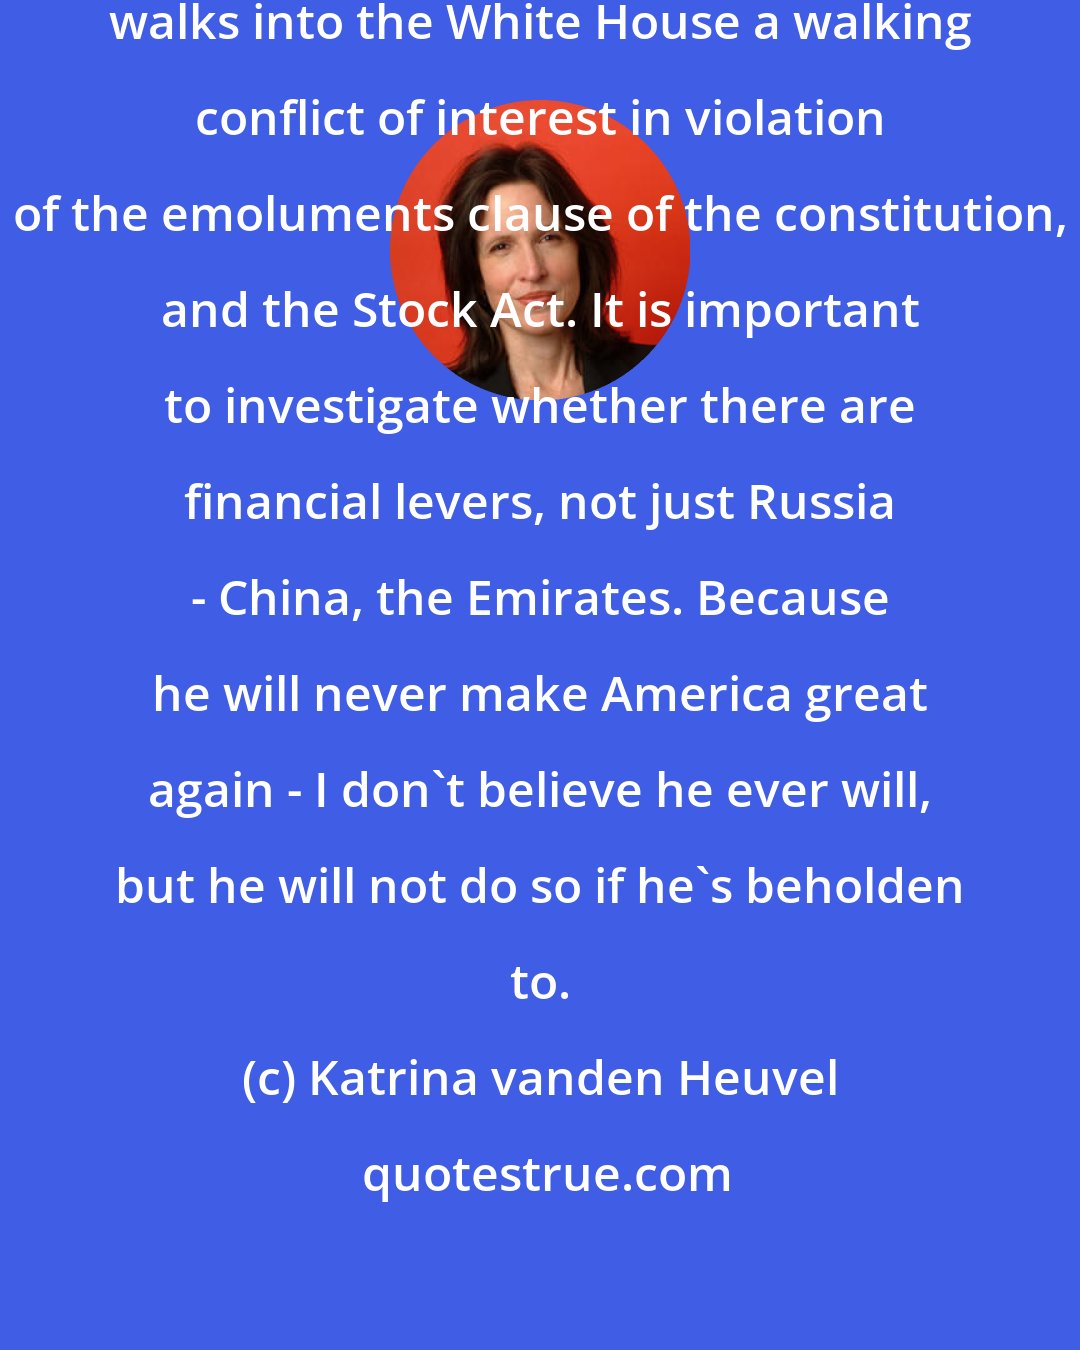 Katrina vanden Heuvel: I am concerned that Donald Trump walks into the White House a walking conflict of interest in violation of the emoluments clause of the constitution, and the Stock Act. It is important to investigate whether there are financial levers, not just Russia - China, the Emirates. Because he will never make America great again - I don't believe he ever will, but he will not do so if he's beholden to.